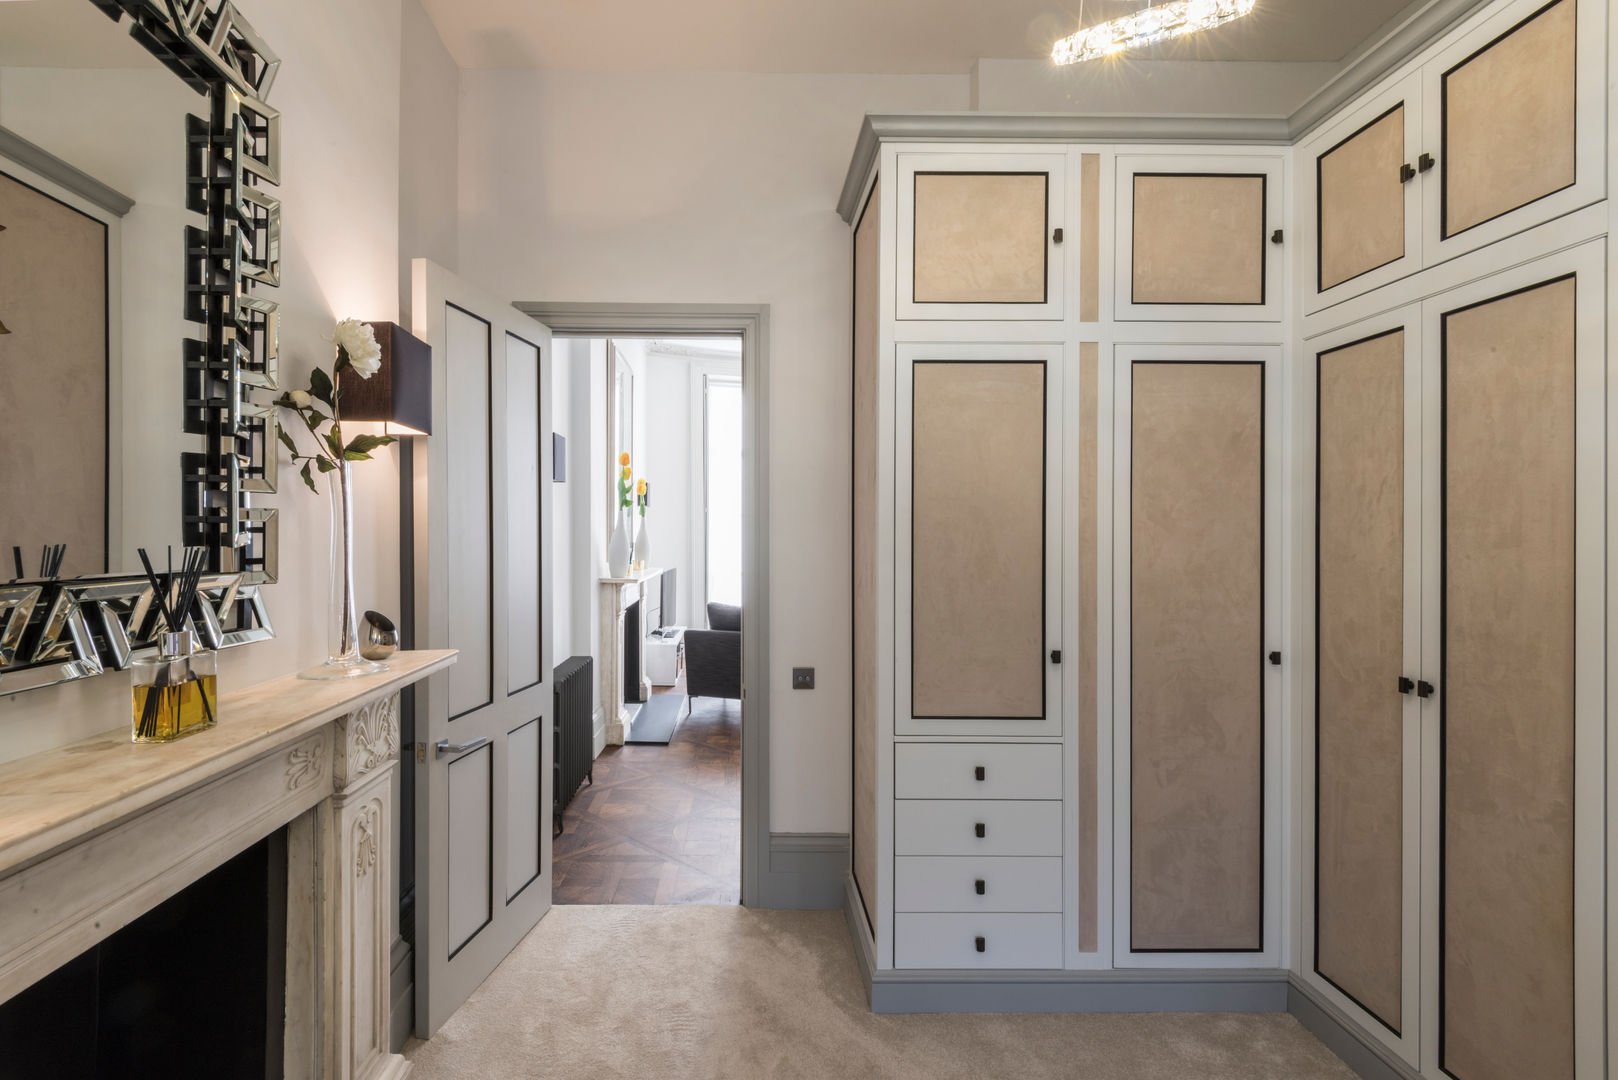 Bachelor Pad - Hyde Park, Prestige Architects By Marco Braghiroli Prestige Architects By Marco Braghiroli Closets clássicos dressing room,waredrobe